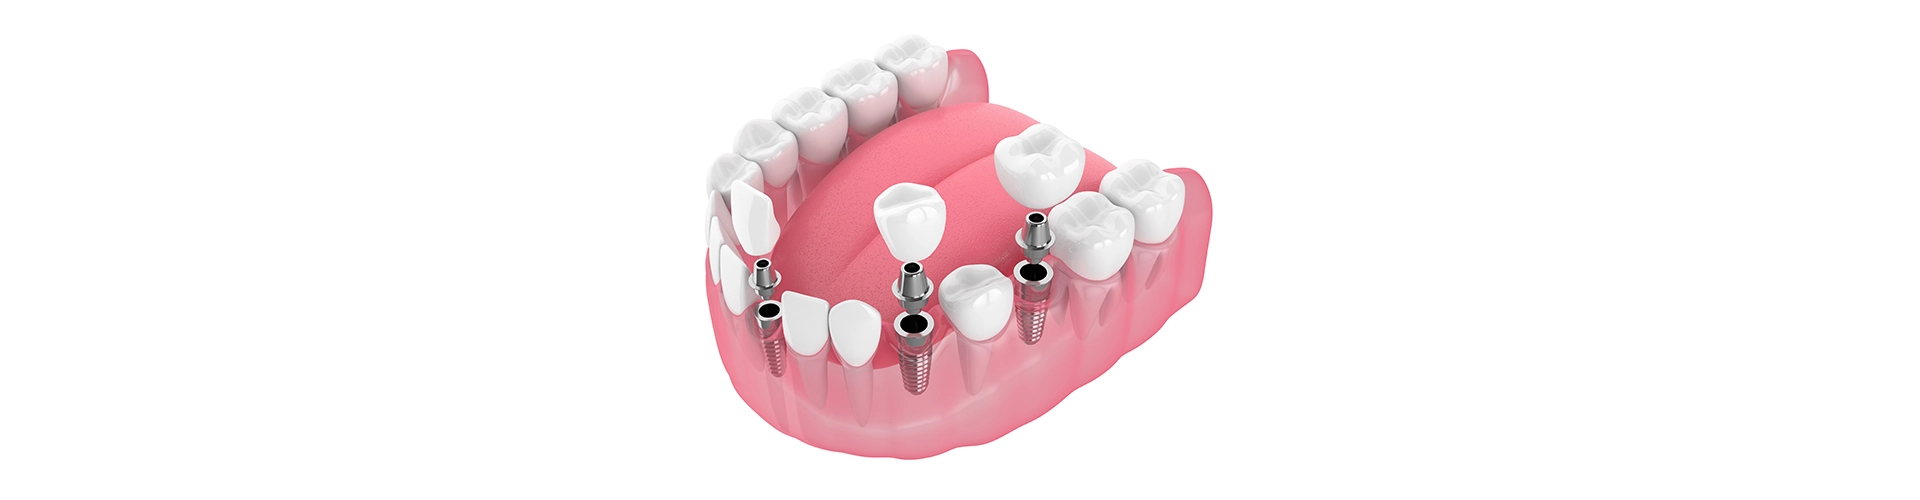 How All-On-4-Dental Implants Are the Right Option for You?